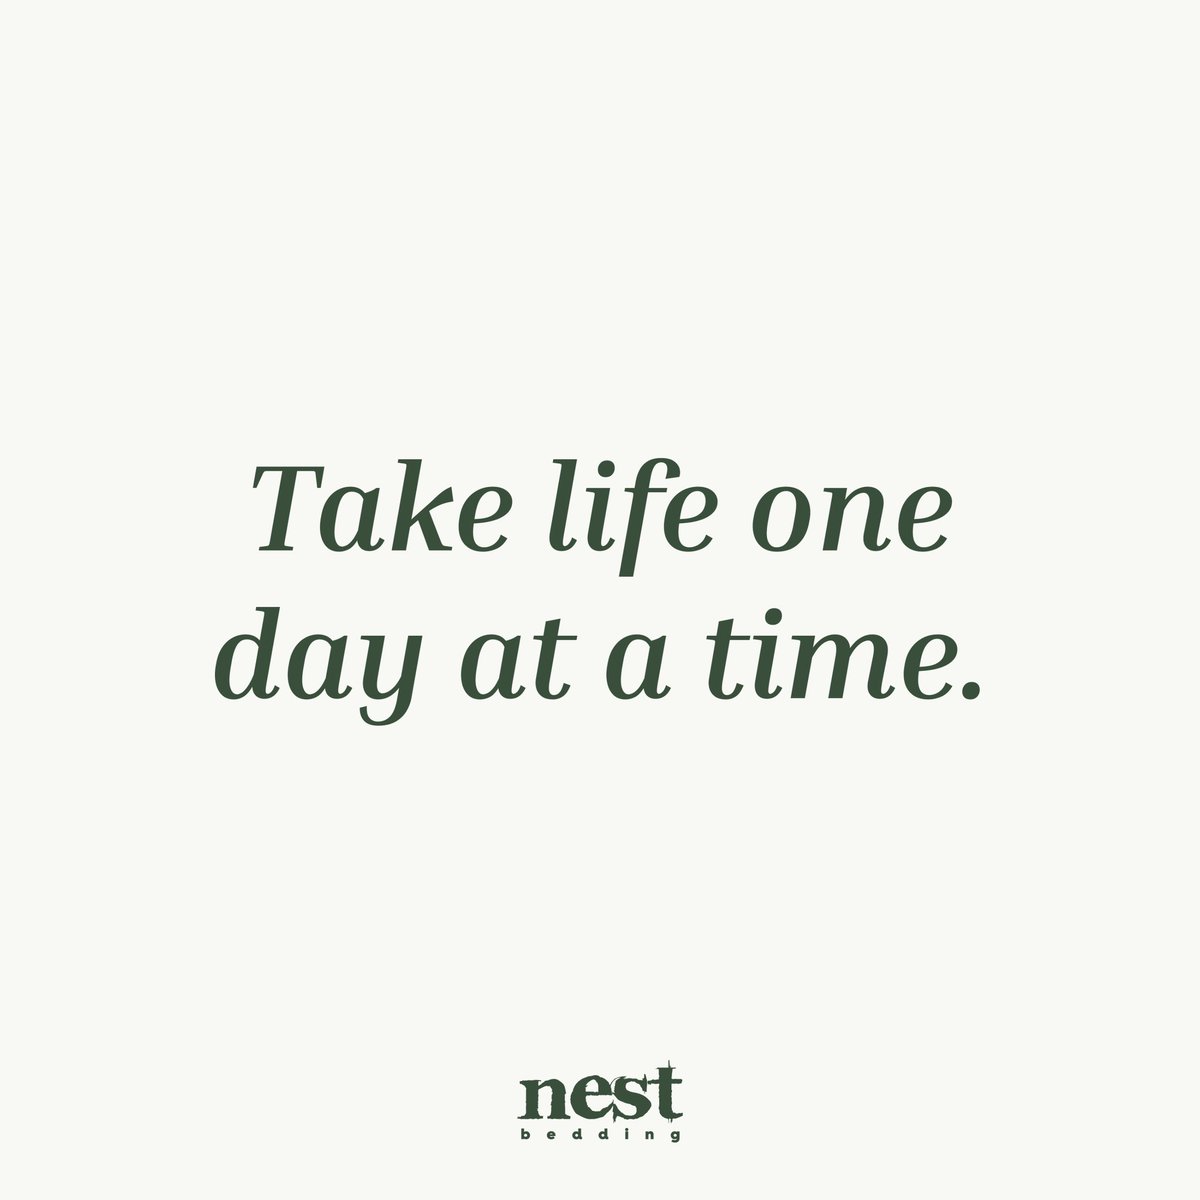 A new month ahead means new goals. This is your reminder to slow down, and take time for yourself🕊️.